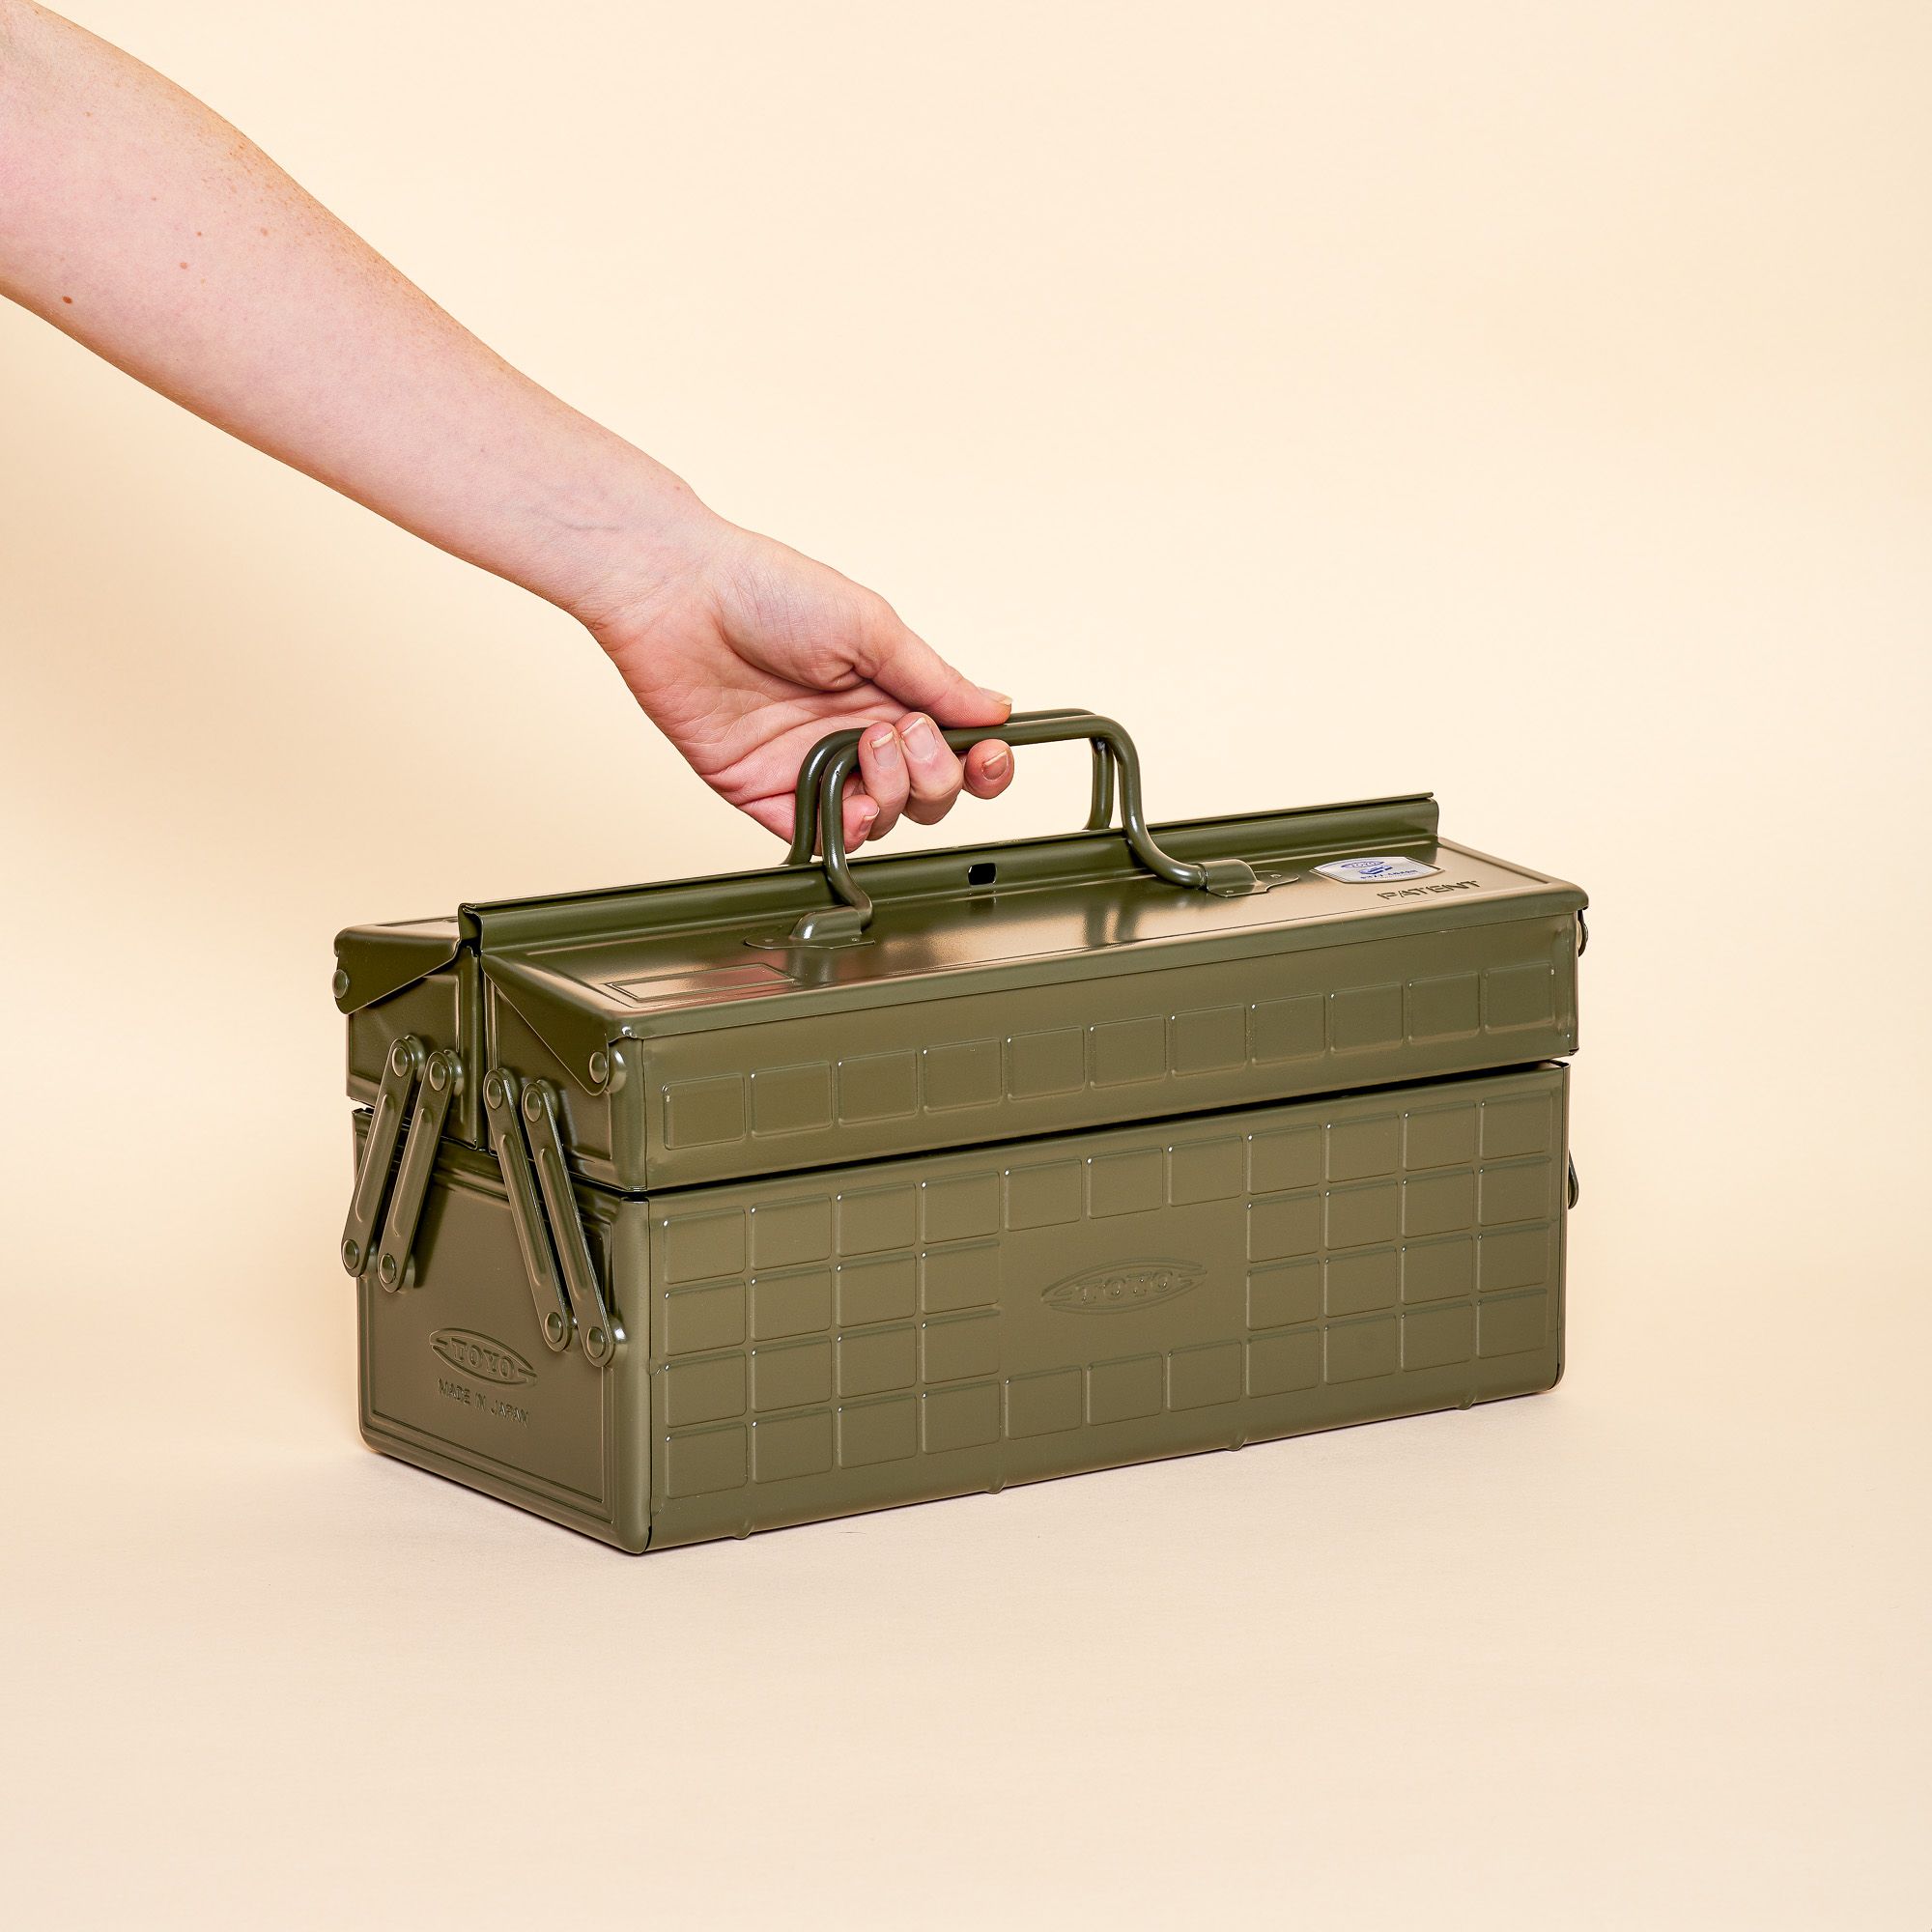 A army green organizer box that folds out to show off different compartments